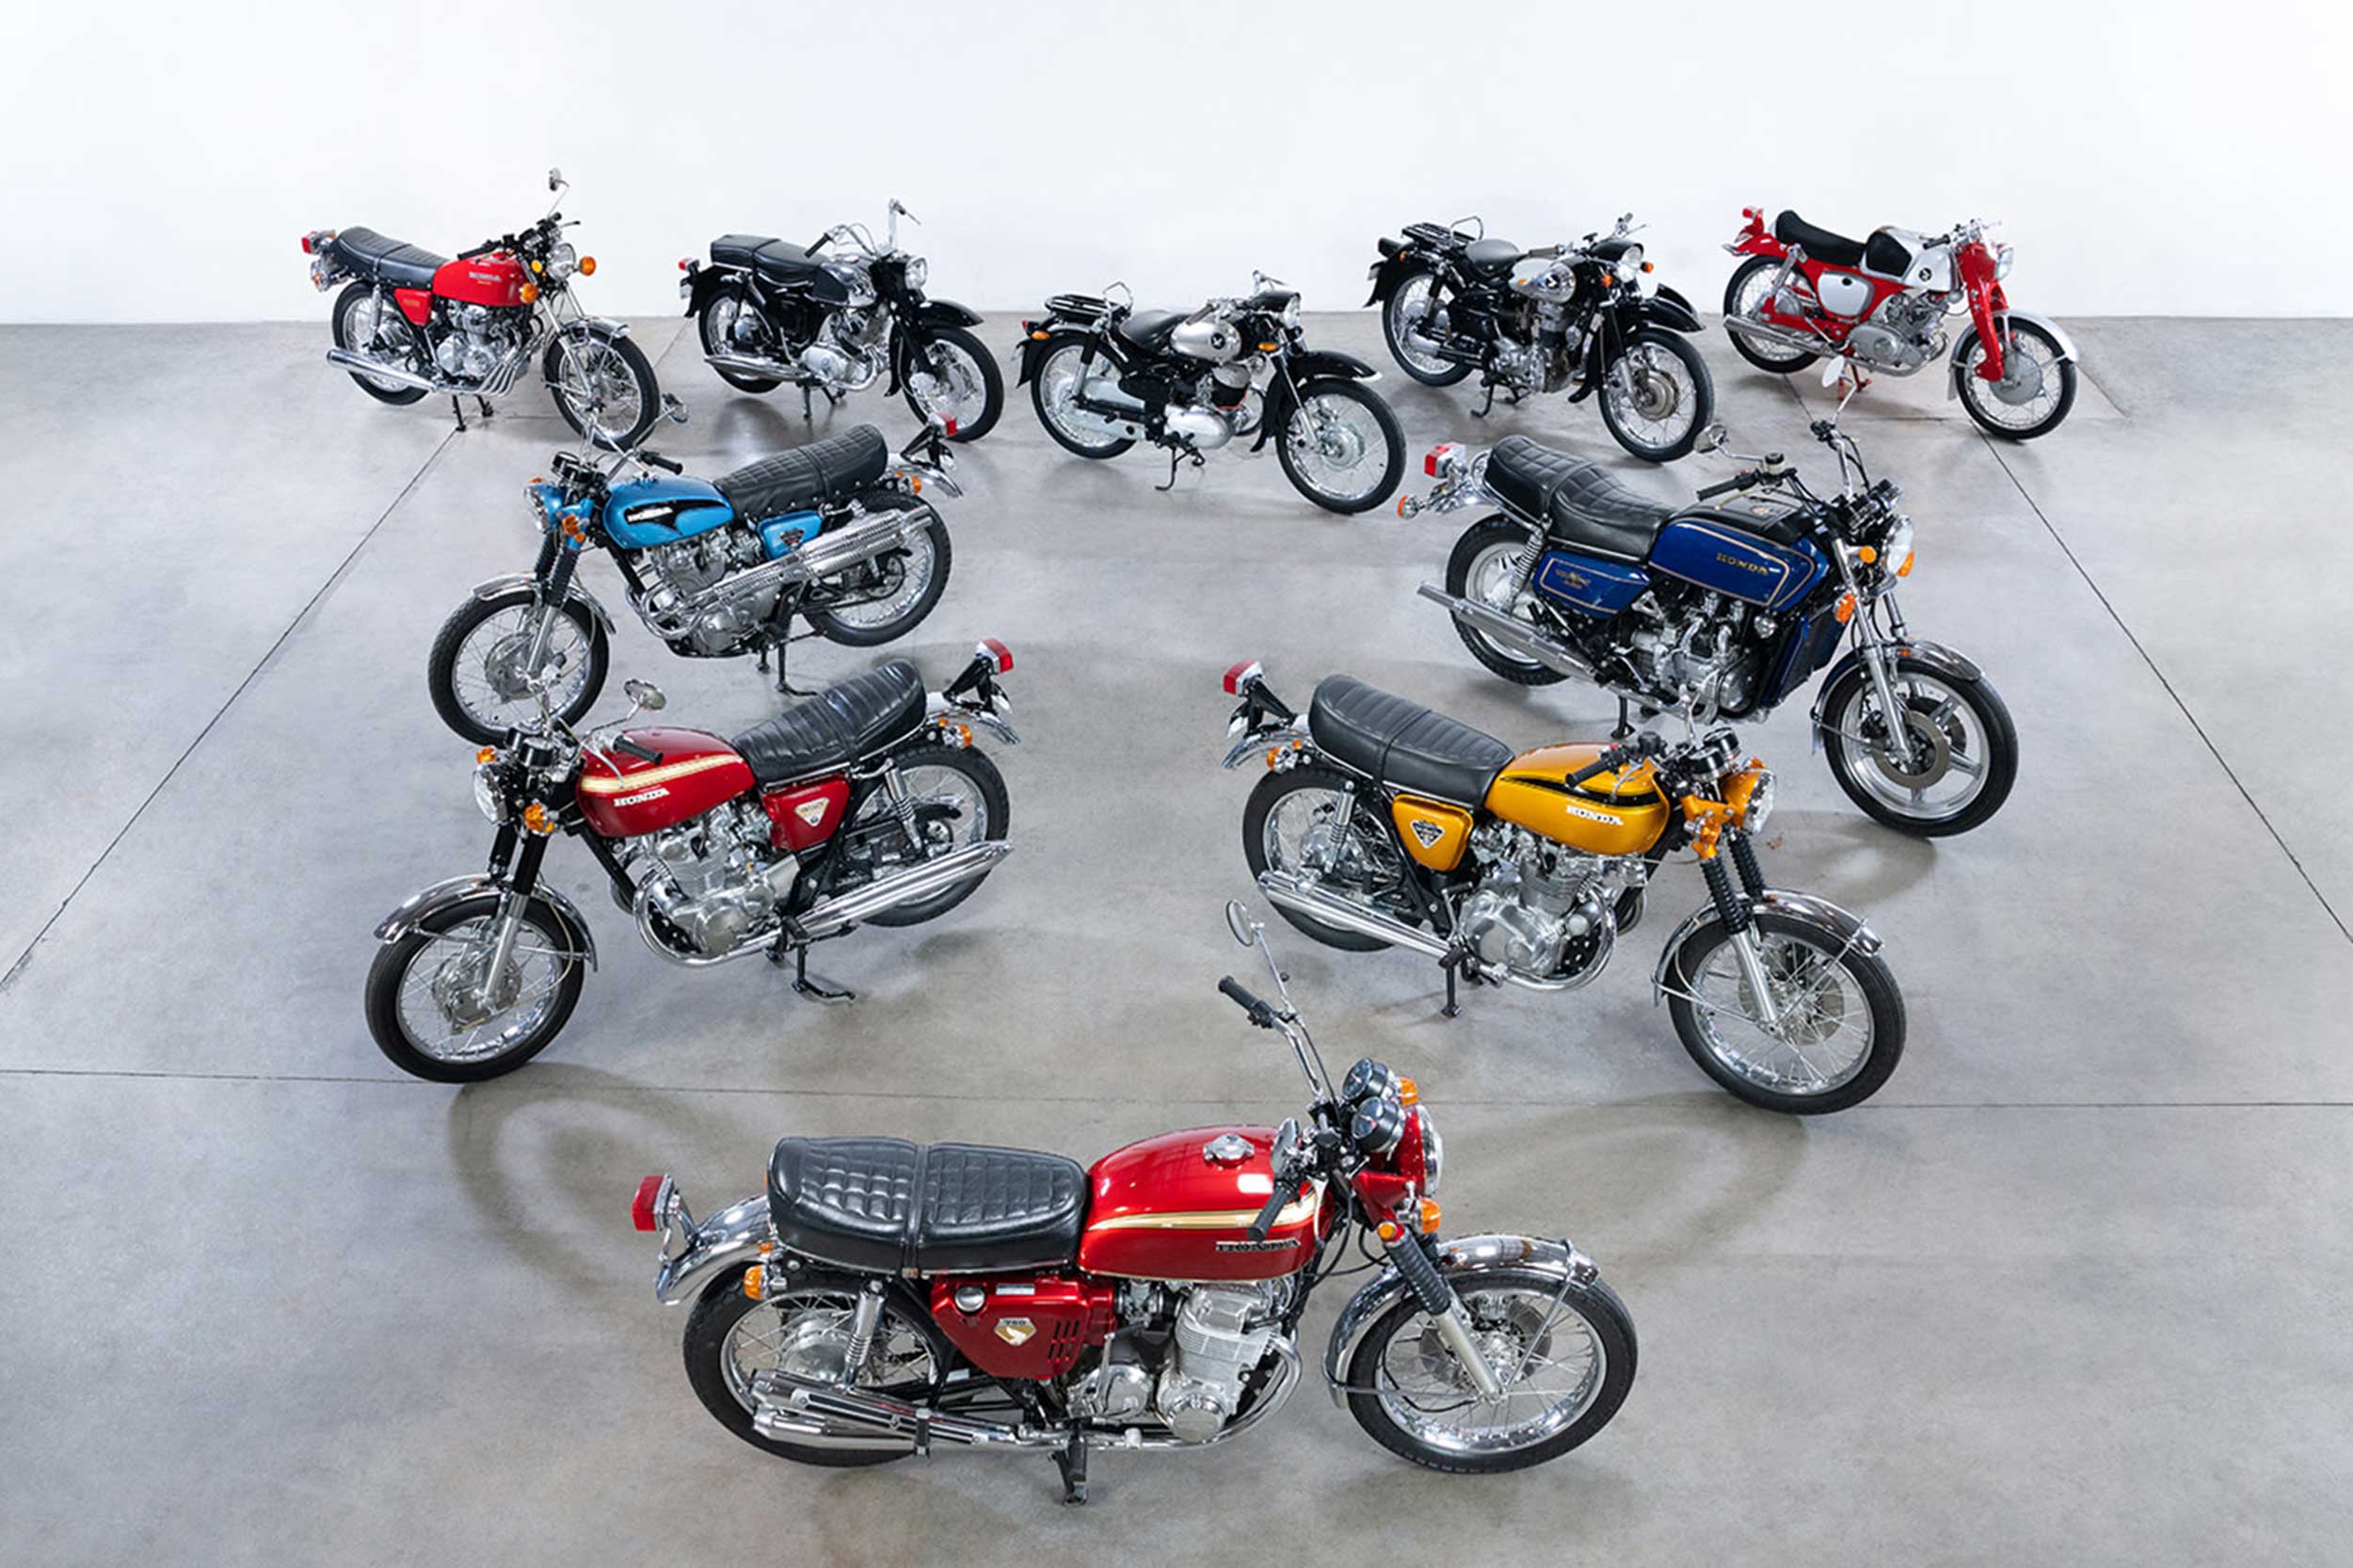 A renowned collection of Honda motorcycles is also up for auction